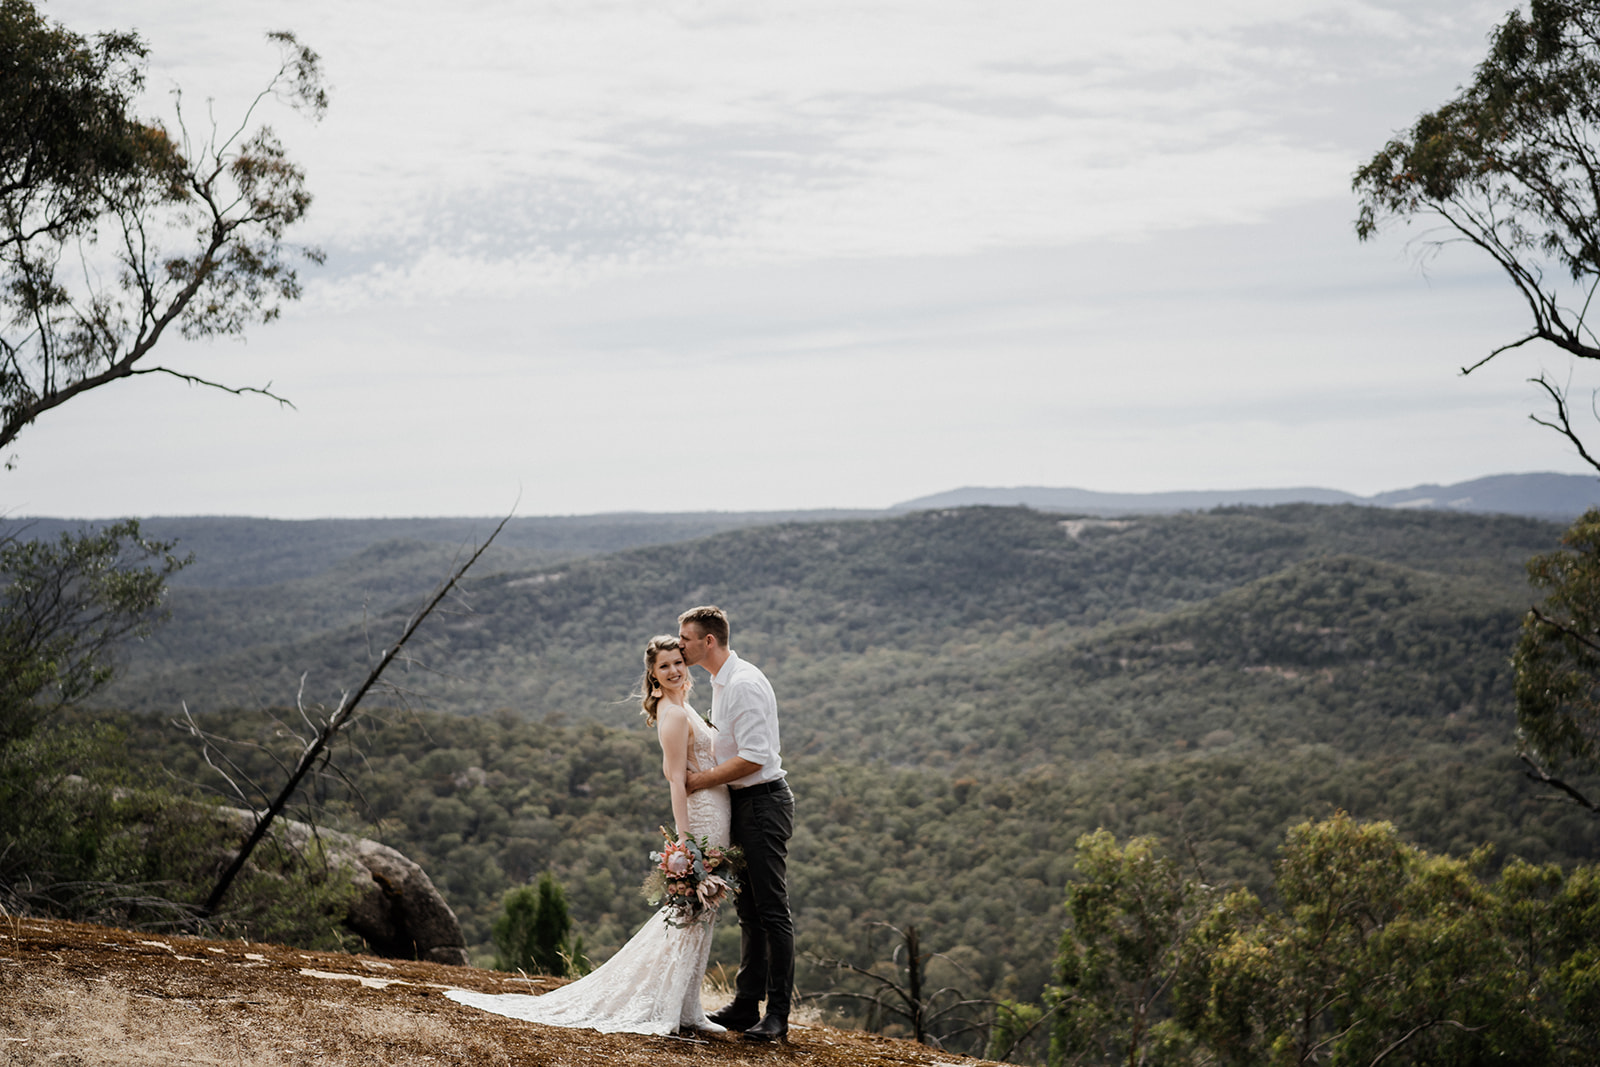 Victoria high country elopement location, Mount Pilot elopement photos, Victoria elopement photographer, Elopement photography Victoria